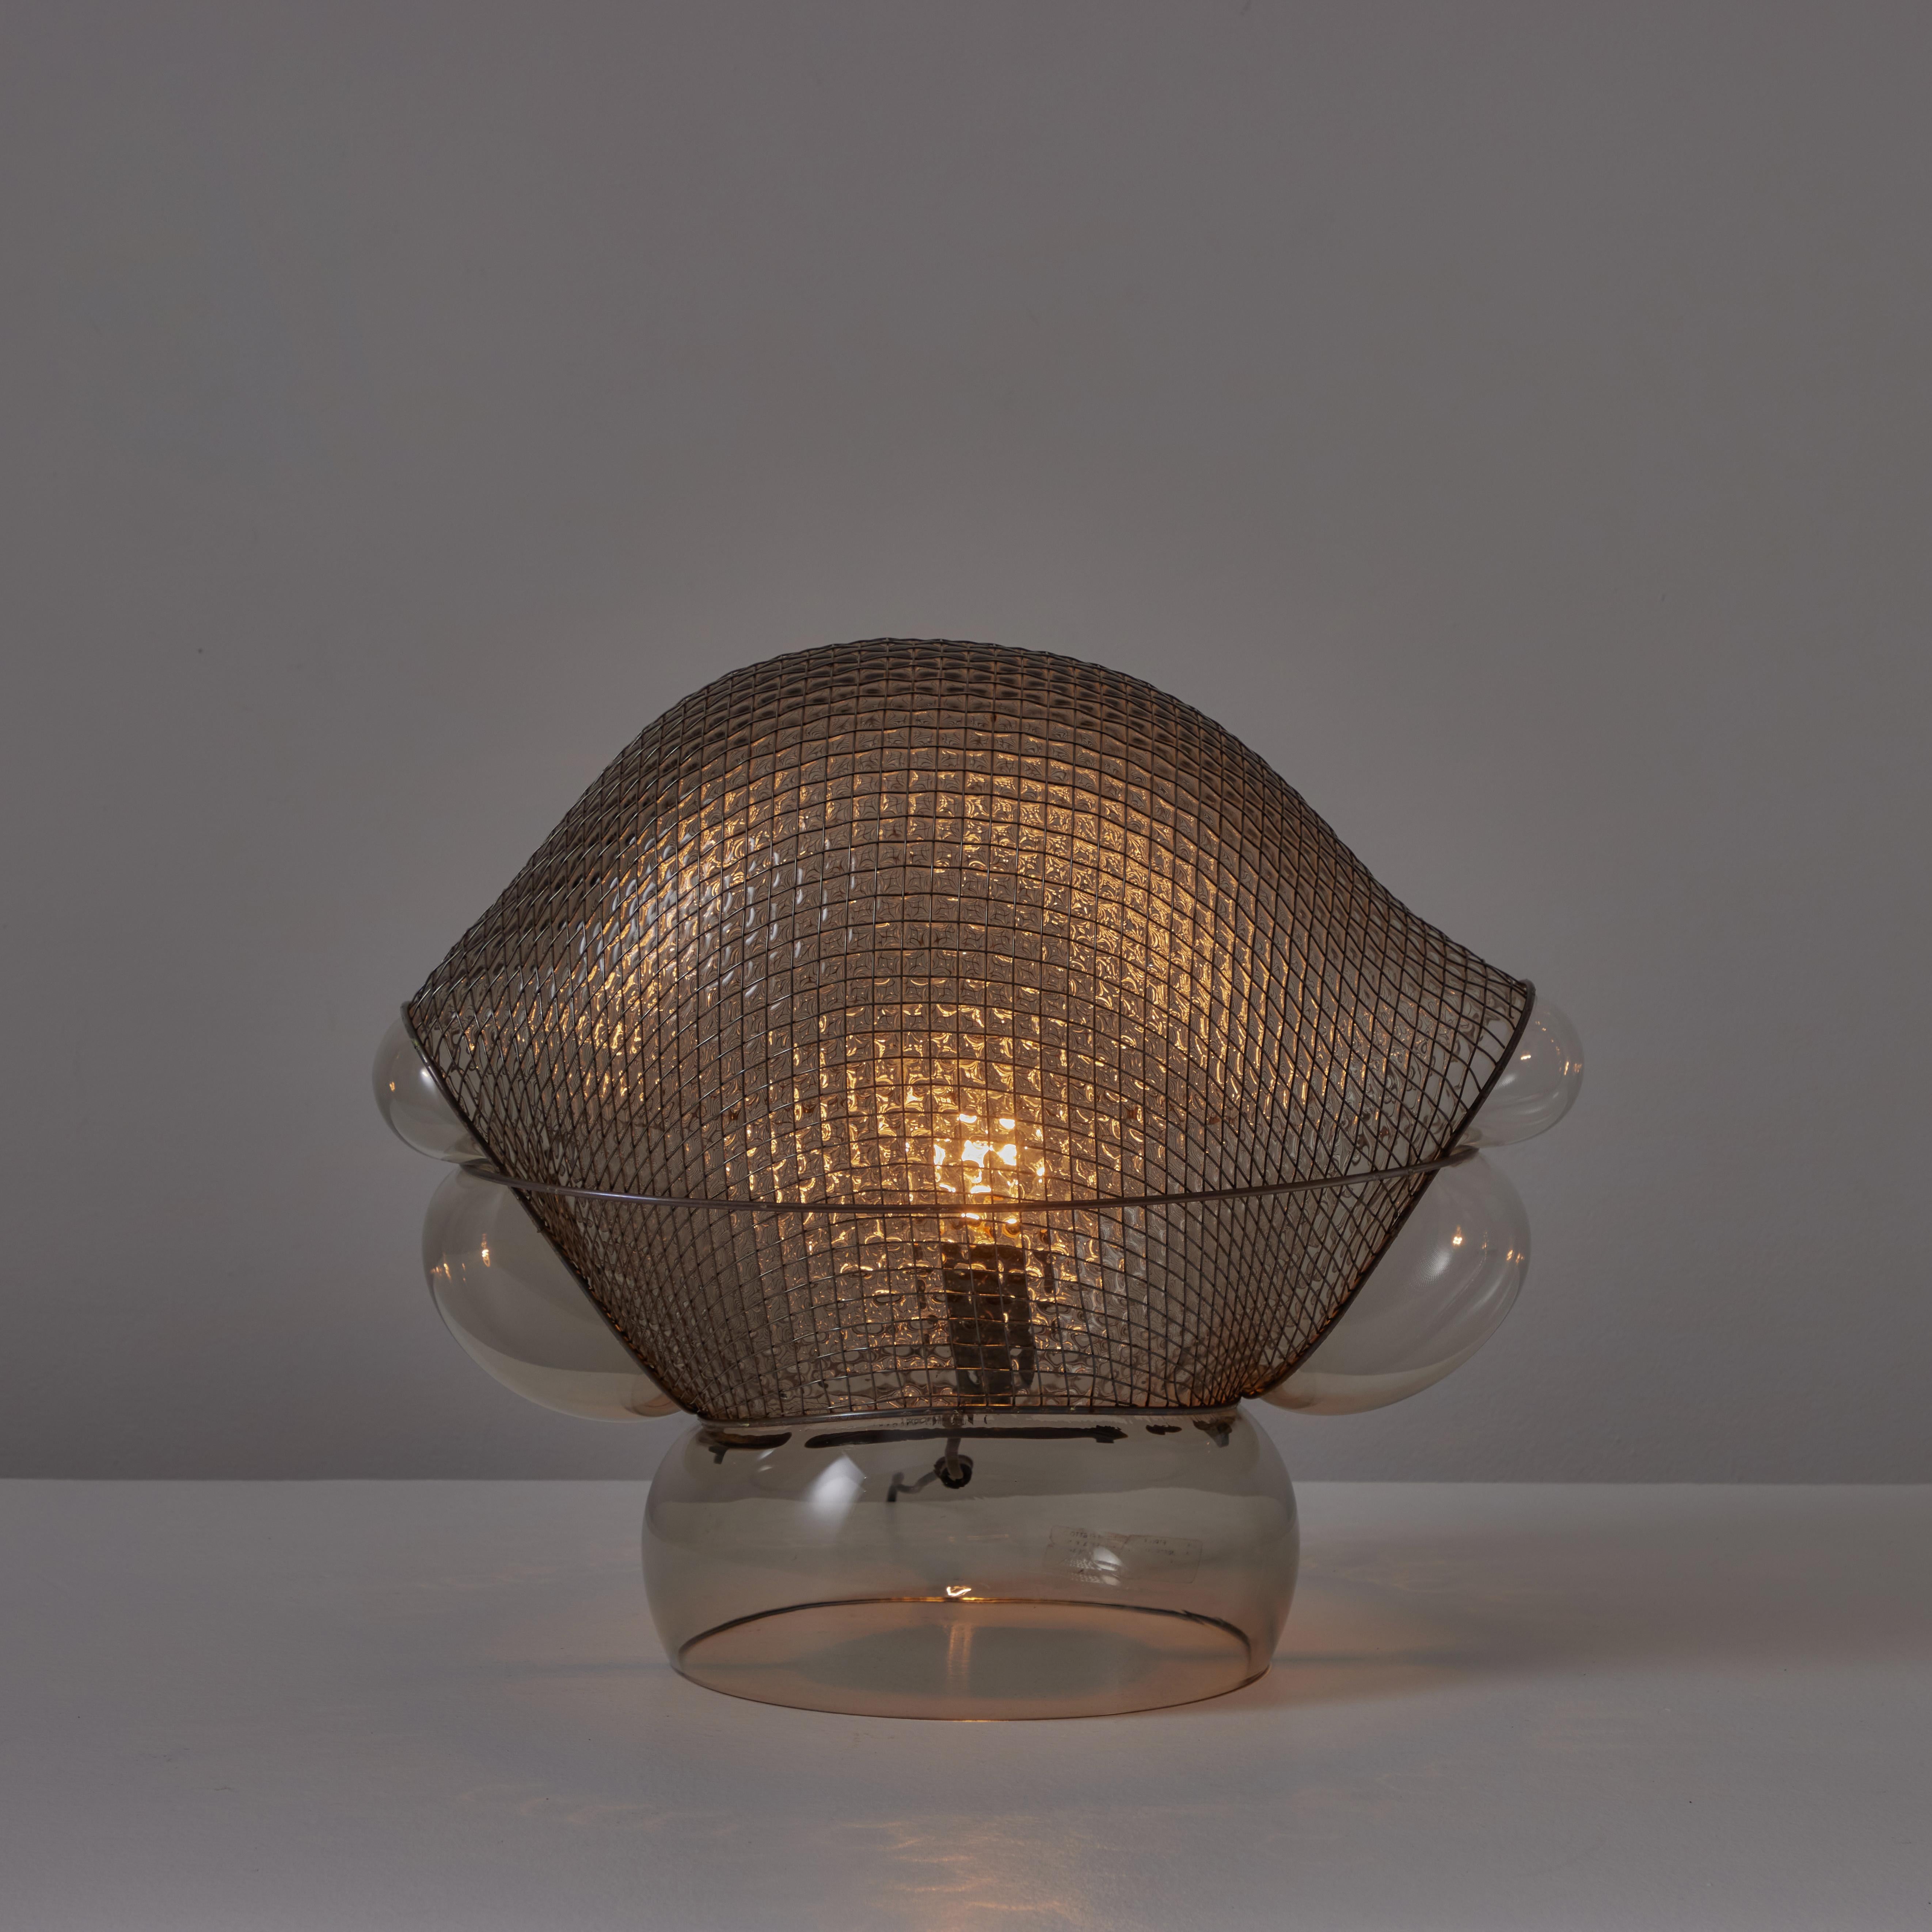 Patroclo table lamp by Gae Aulenti for Artemide. Originally designed in 1975. Smoke colored blown glass and steel mesh. Toggle switch on cord. Maintains original Artemide label. Holds a single E27 socket, adapted for the US. We recommend one 60w